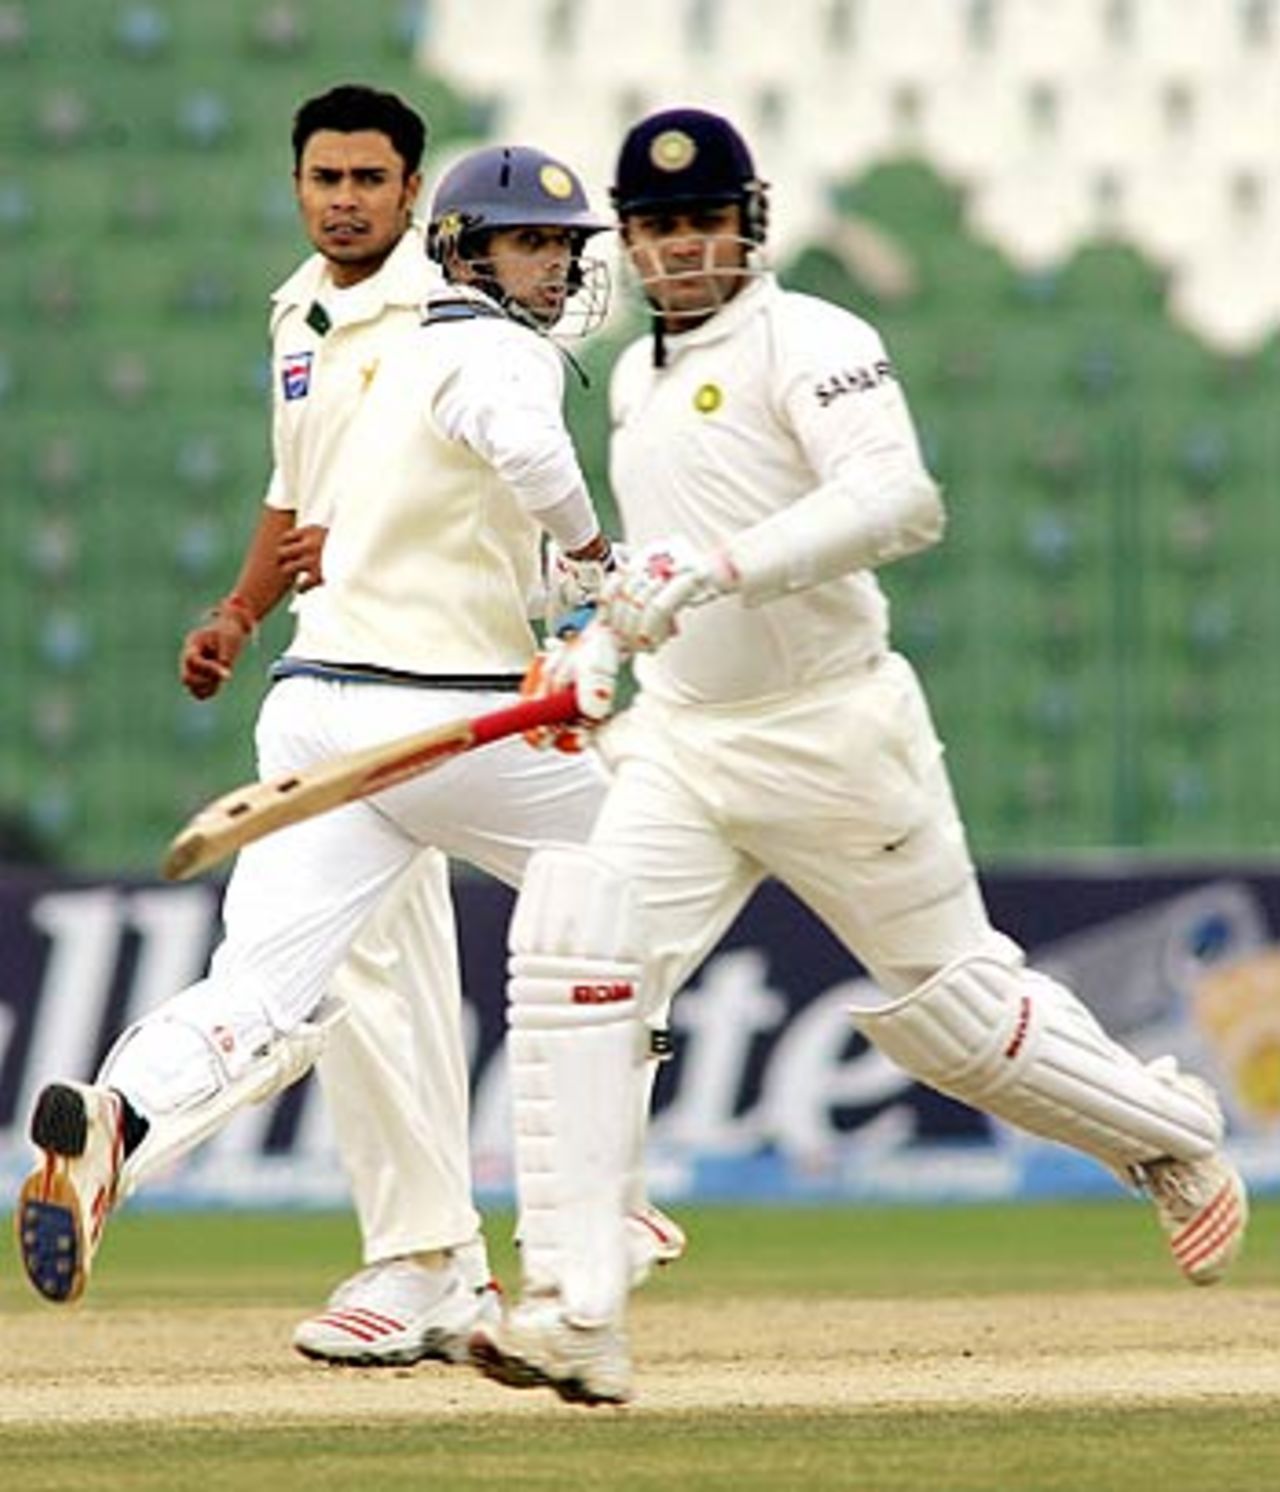 Rahul Dravid and Virender Sehwag during their mammoth stand, India in Pakistan, 1st Test, Lahore, January 16, 2006